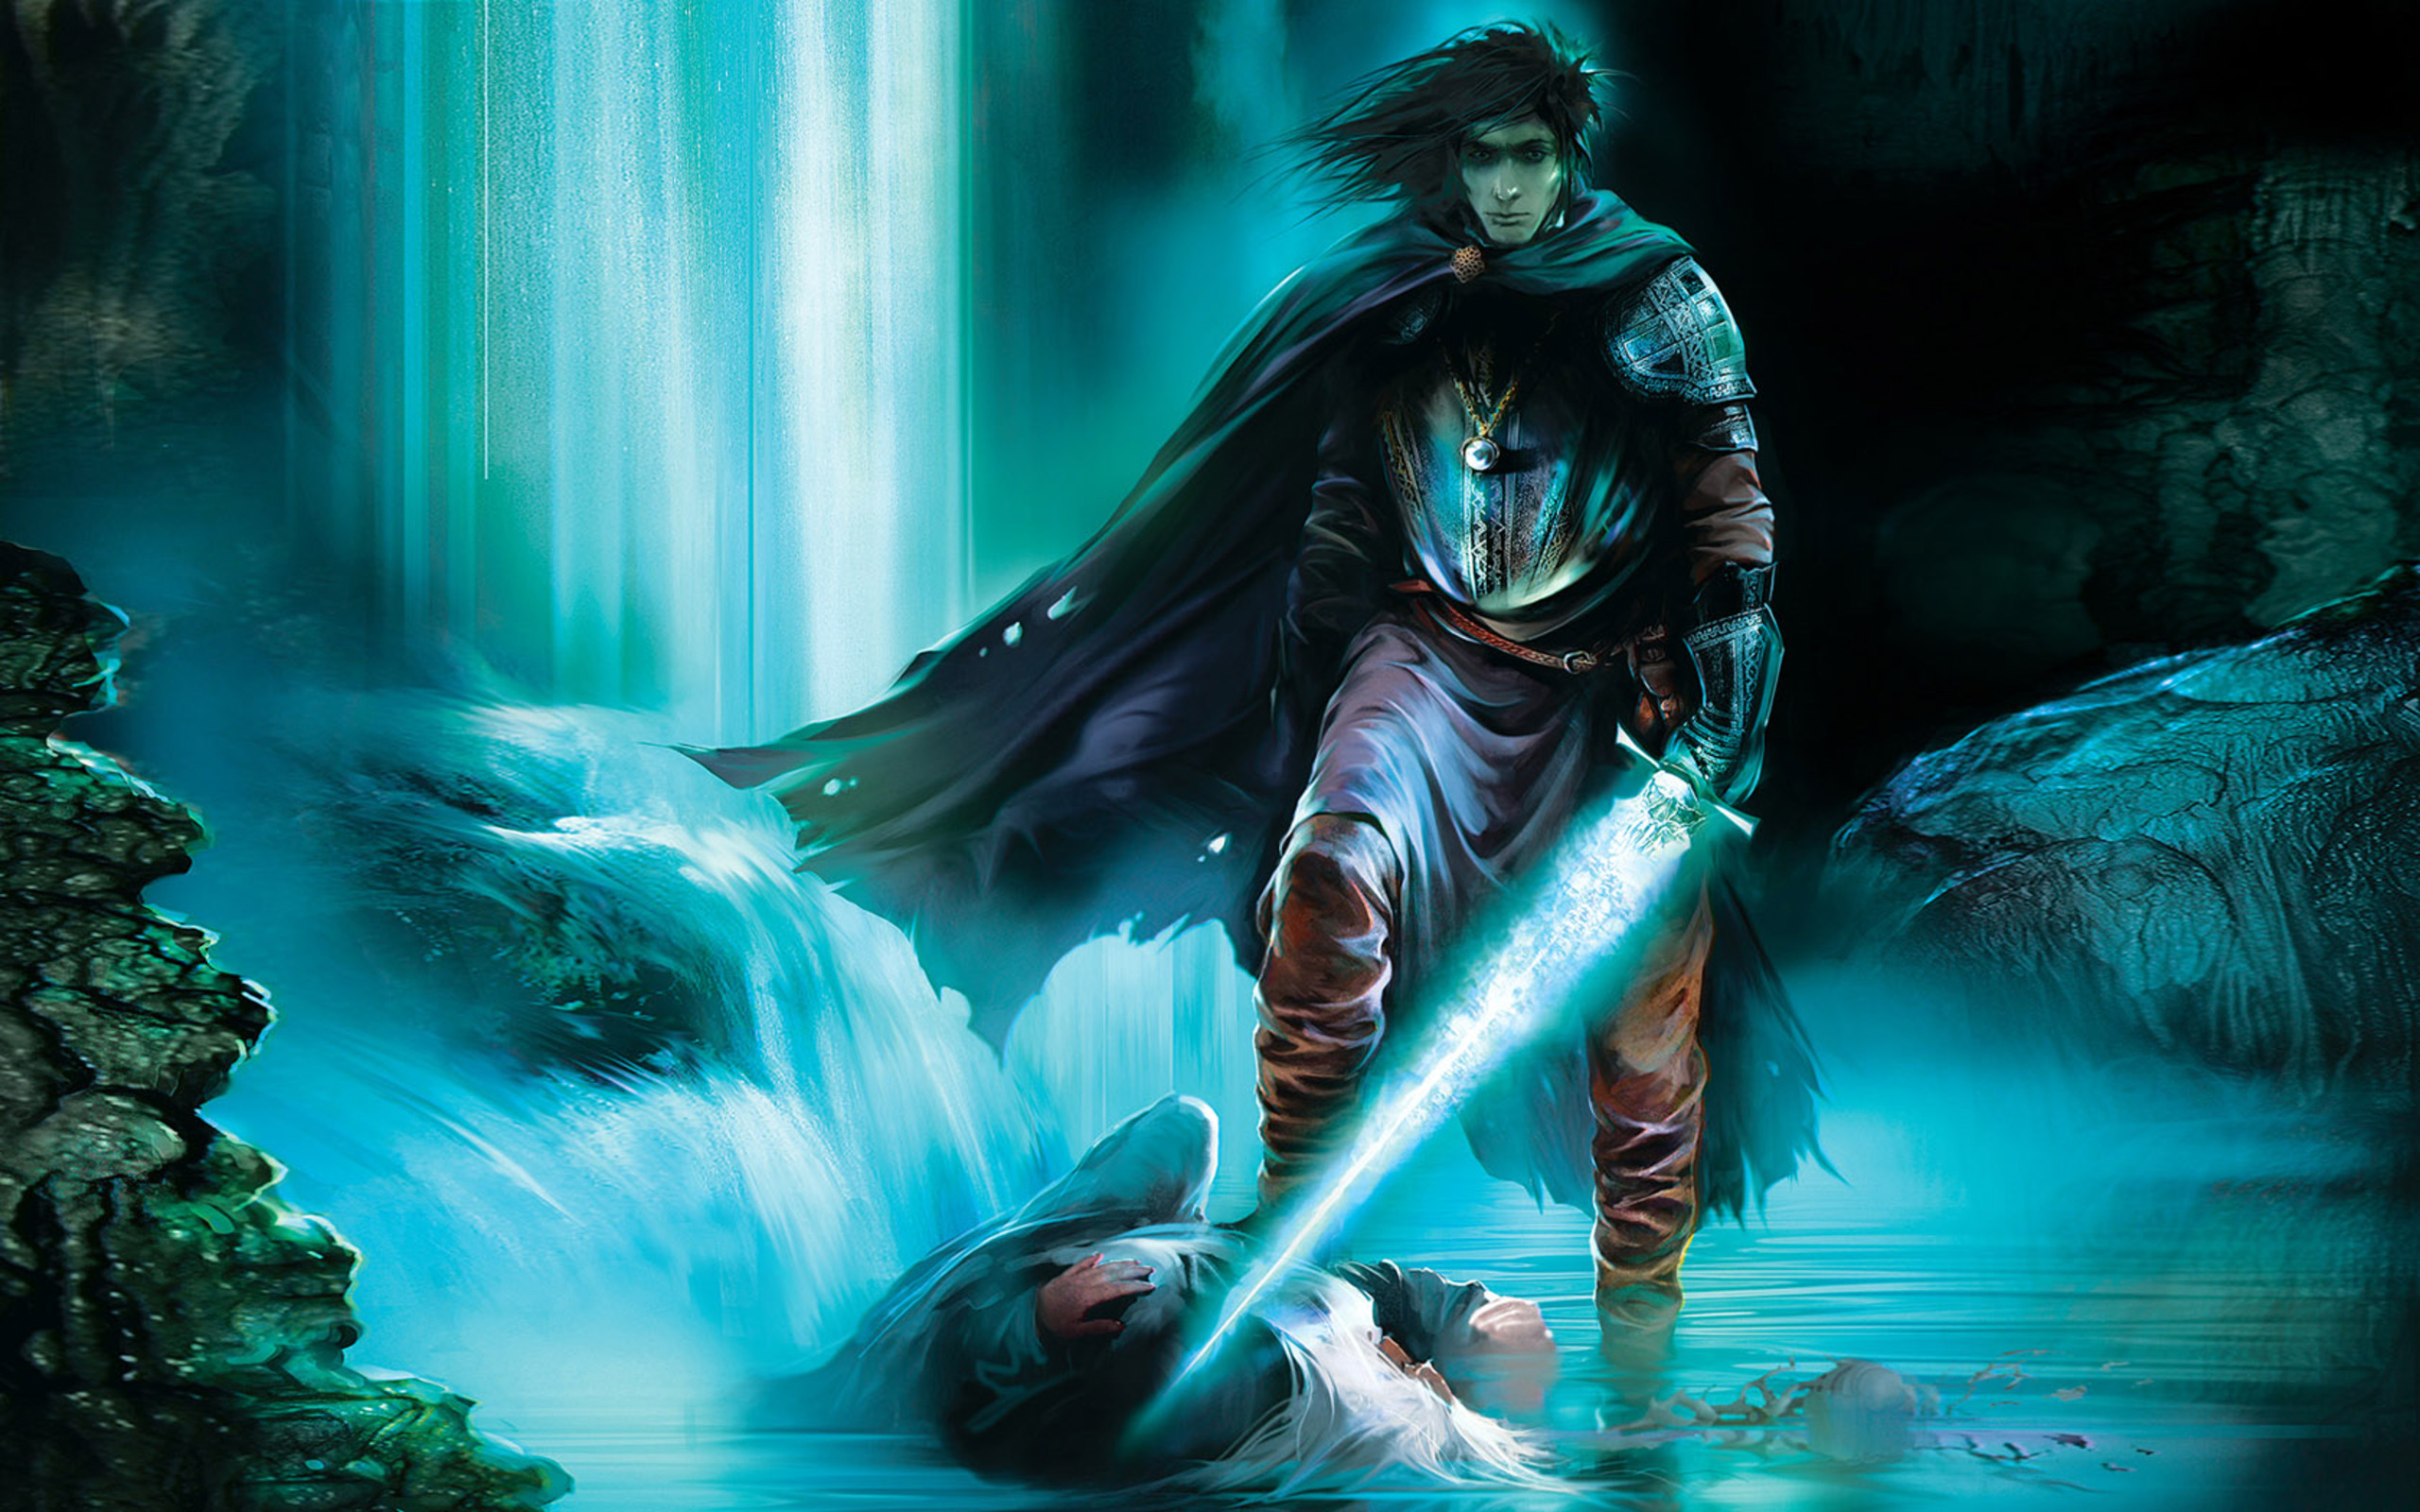 Excalibur sword in front of a waterfall with a cape and necklace.